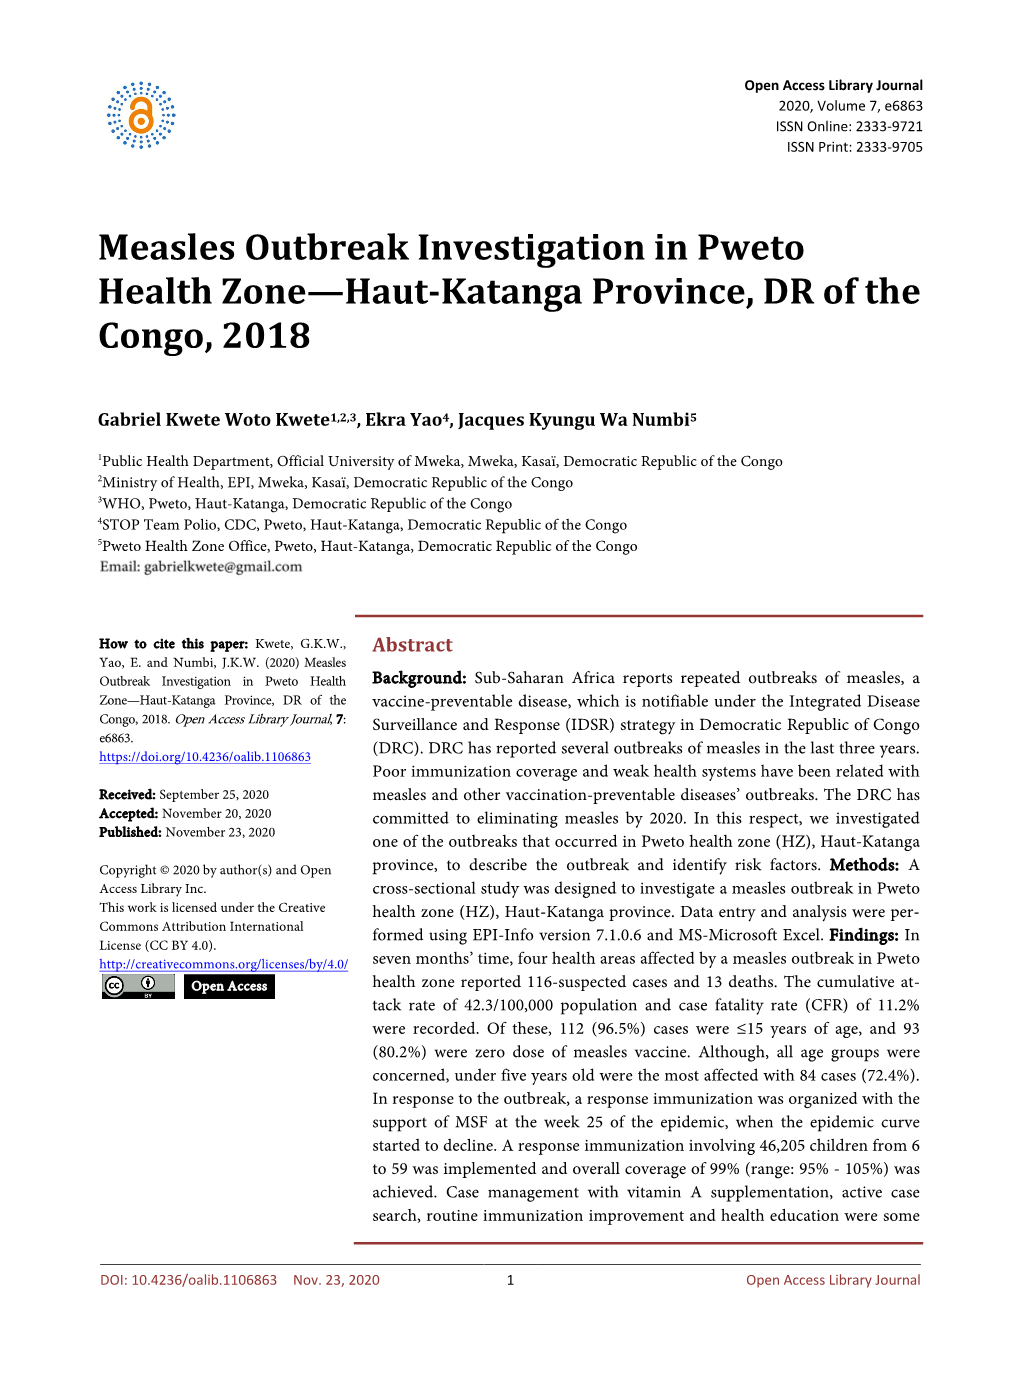 Measles Outbreak Investigation in Pweto Health Zone—Haut-Katanga Province, DR of the Congo, 2018